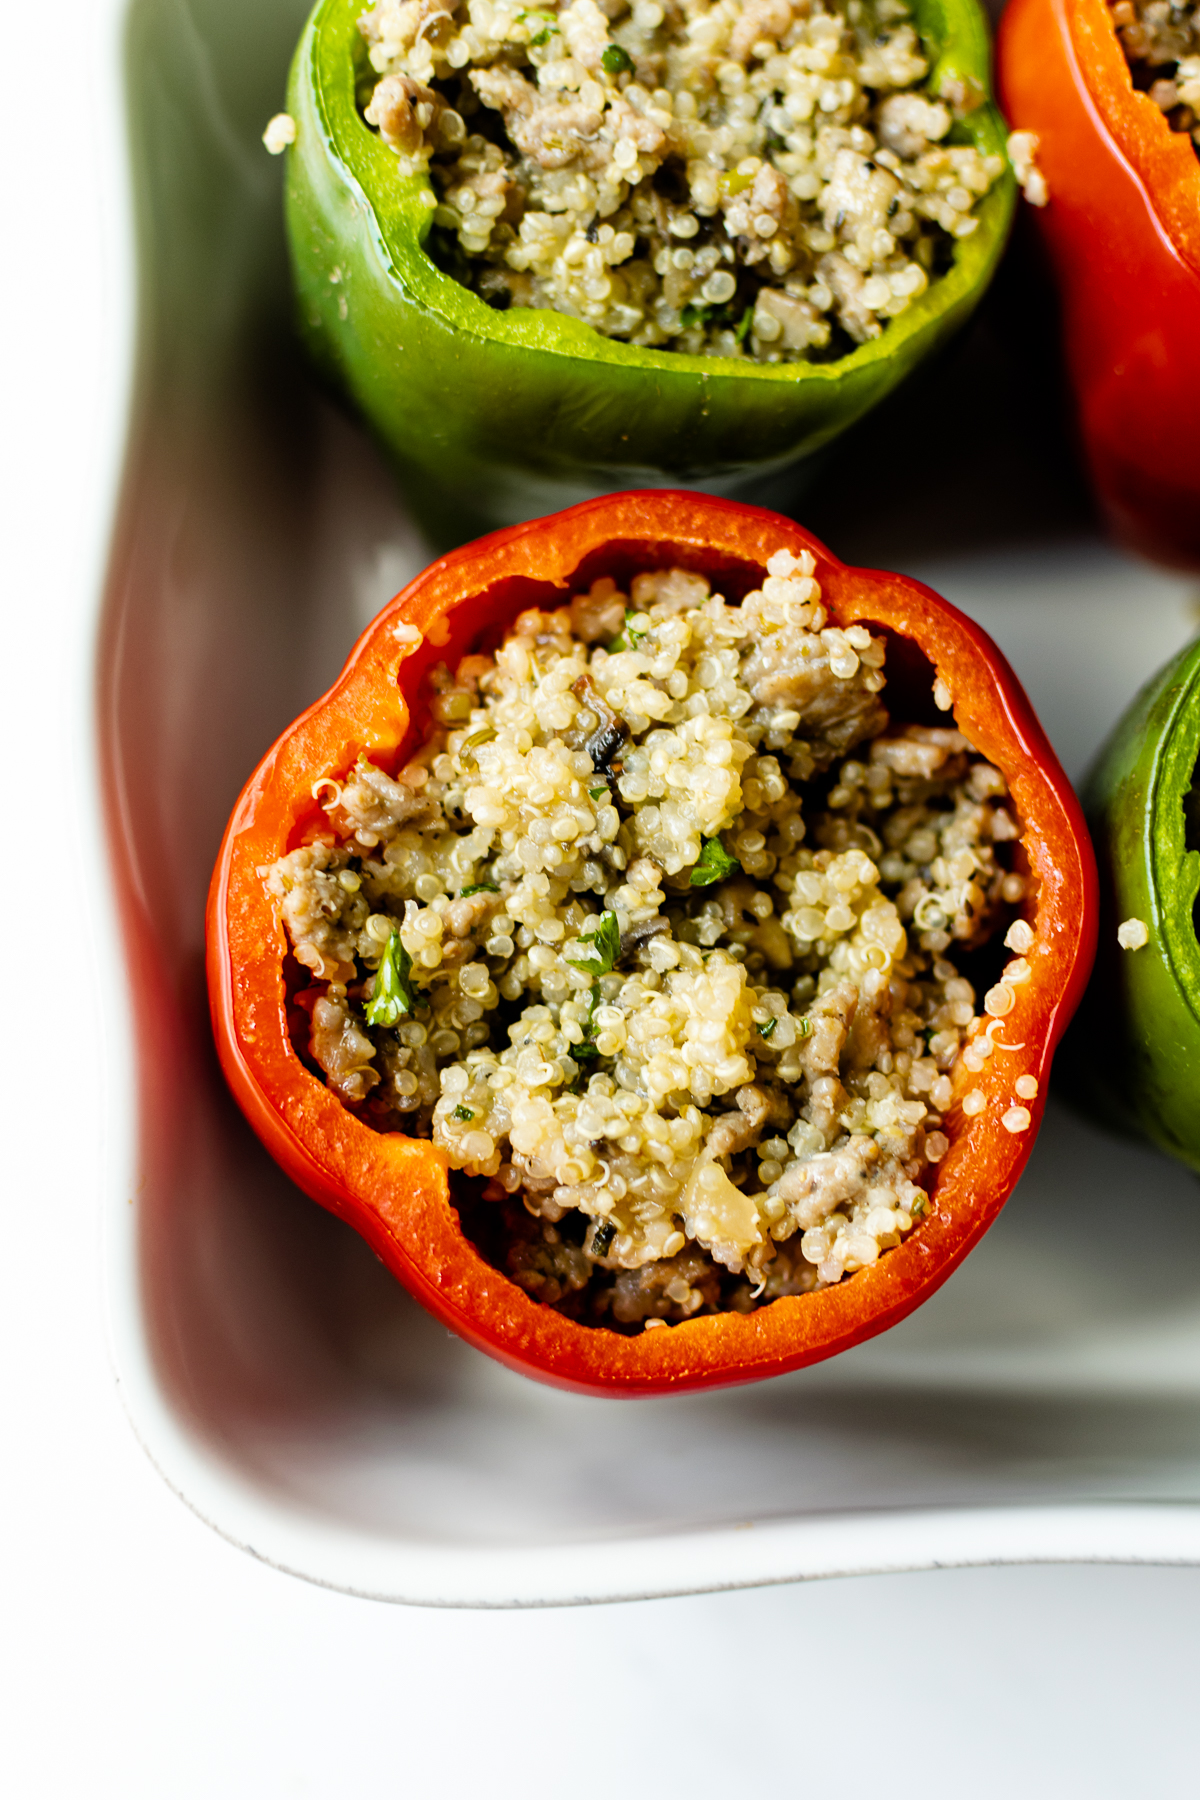 bell peppers stuffed with sausage and quinoa filling in a white baking dish.